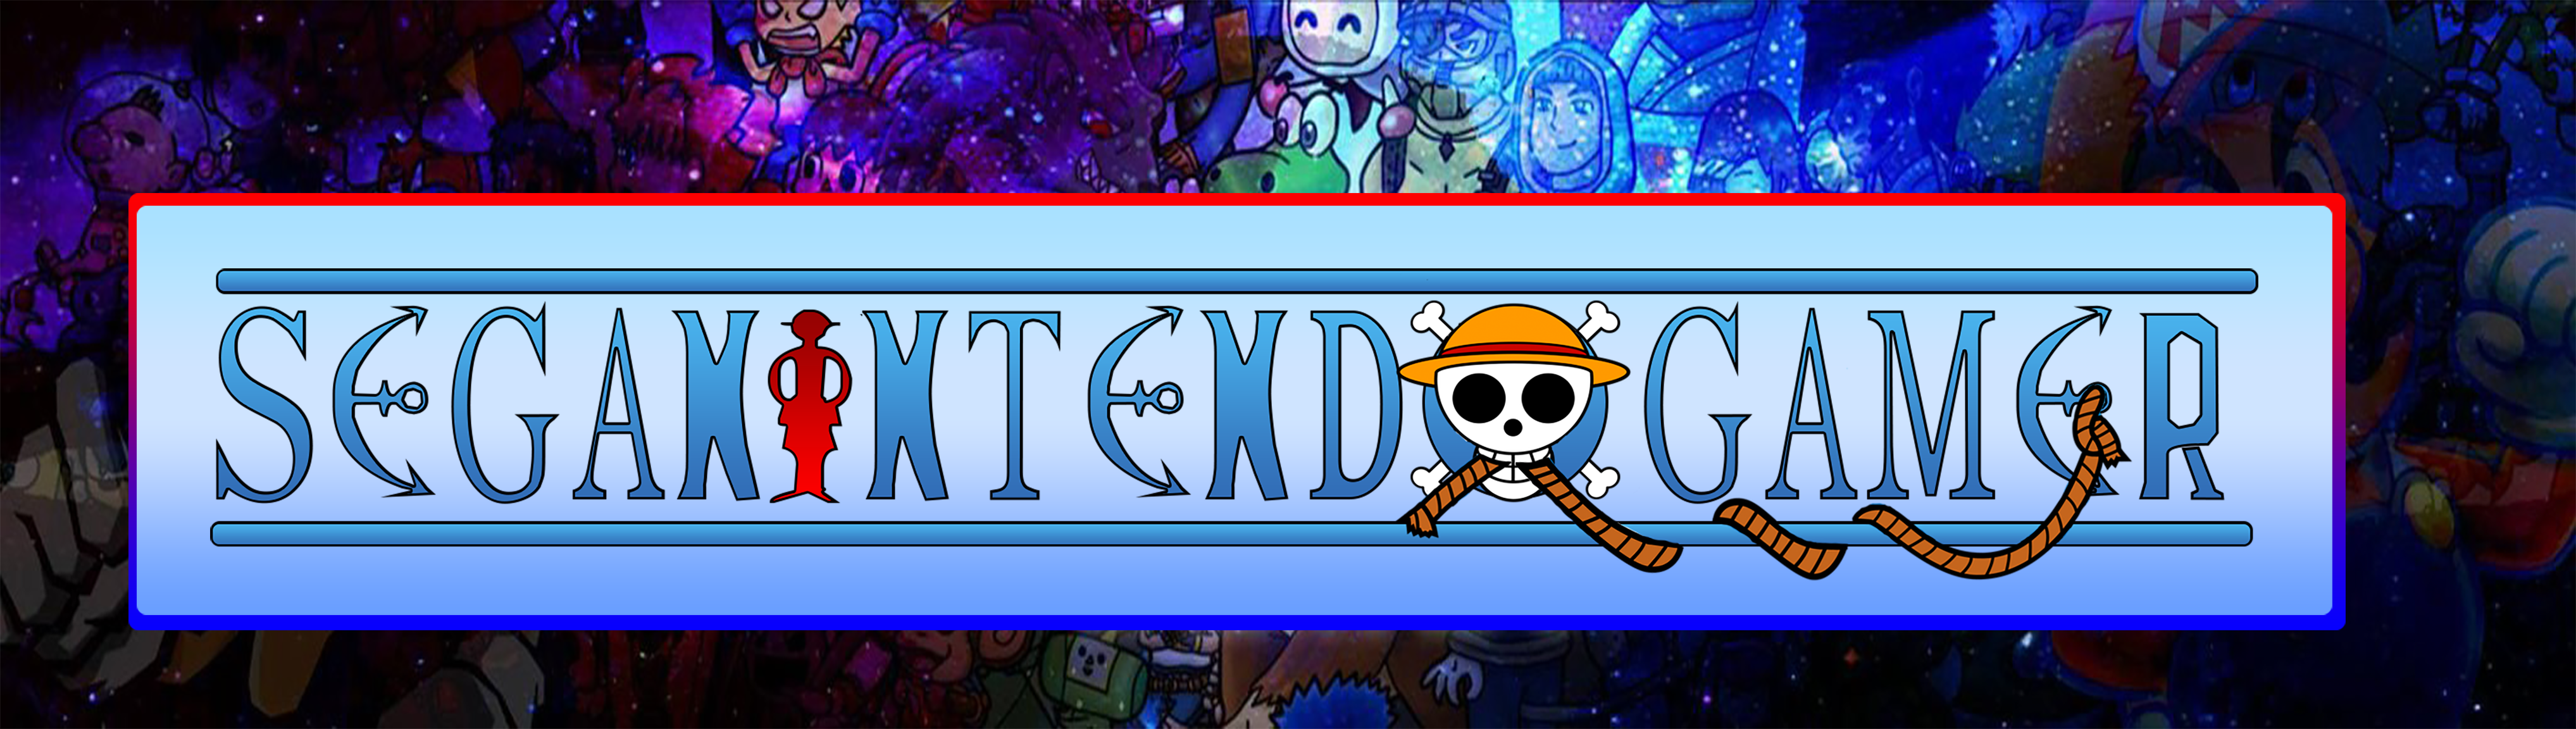 One Piece Youtube Banner By Sonicotakusng On Deviantart